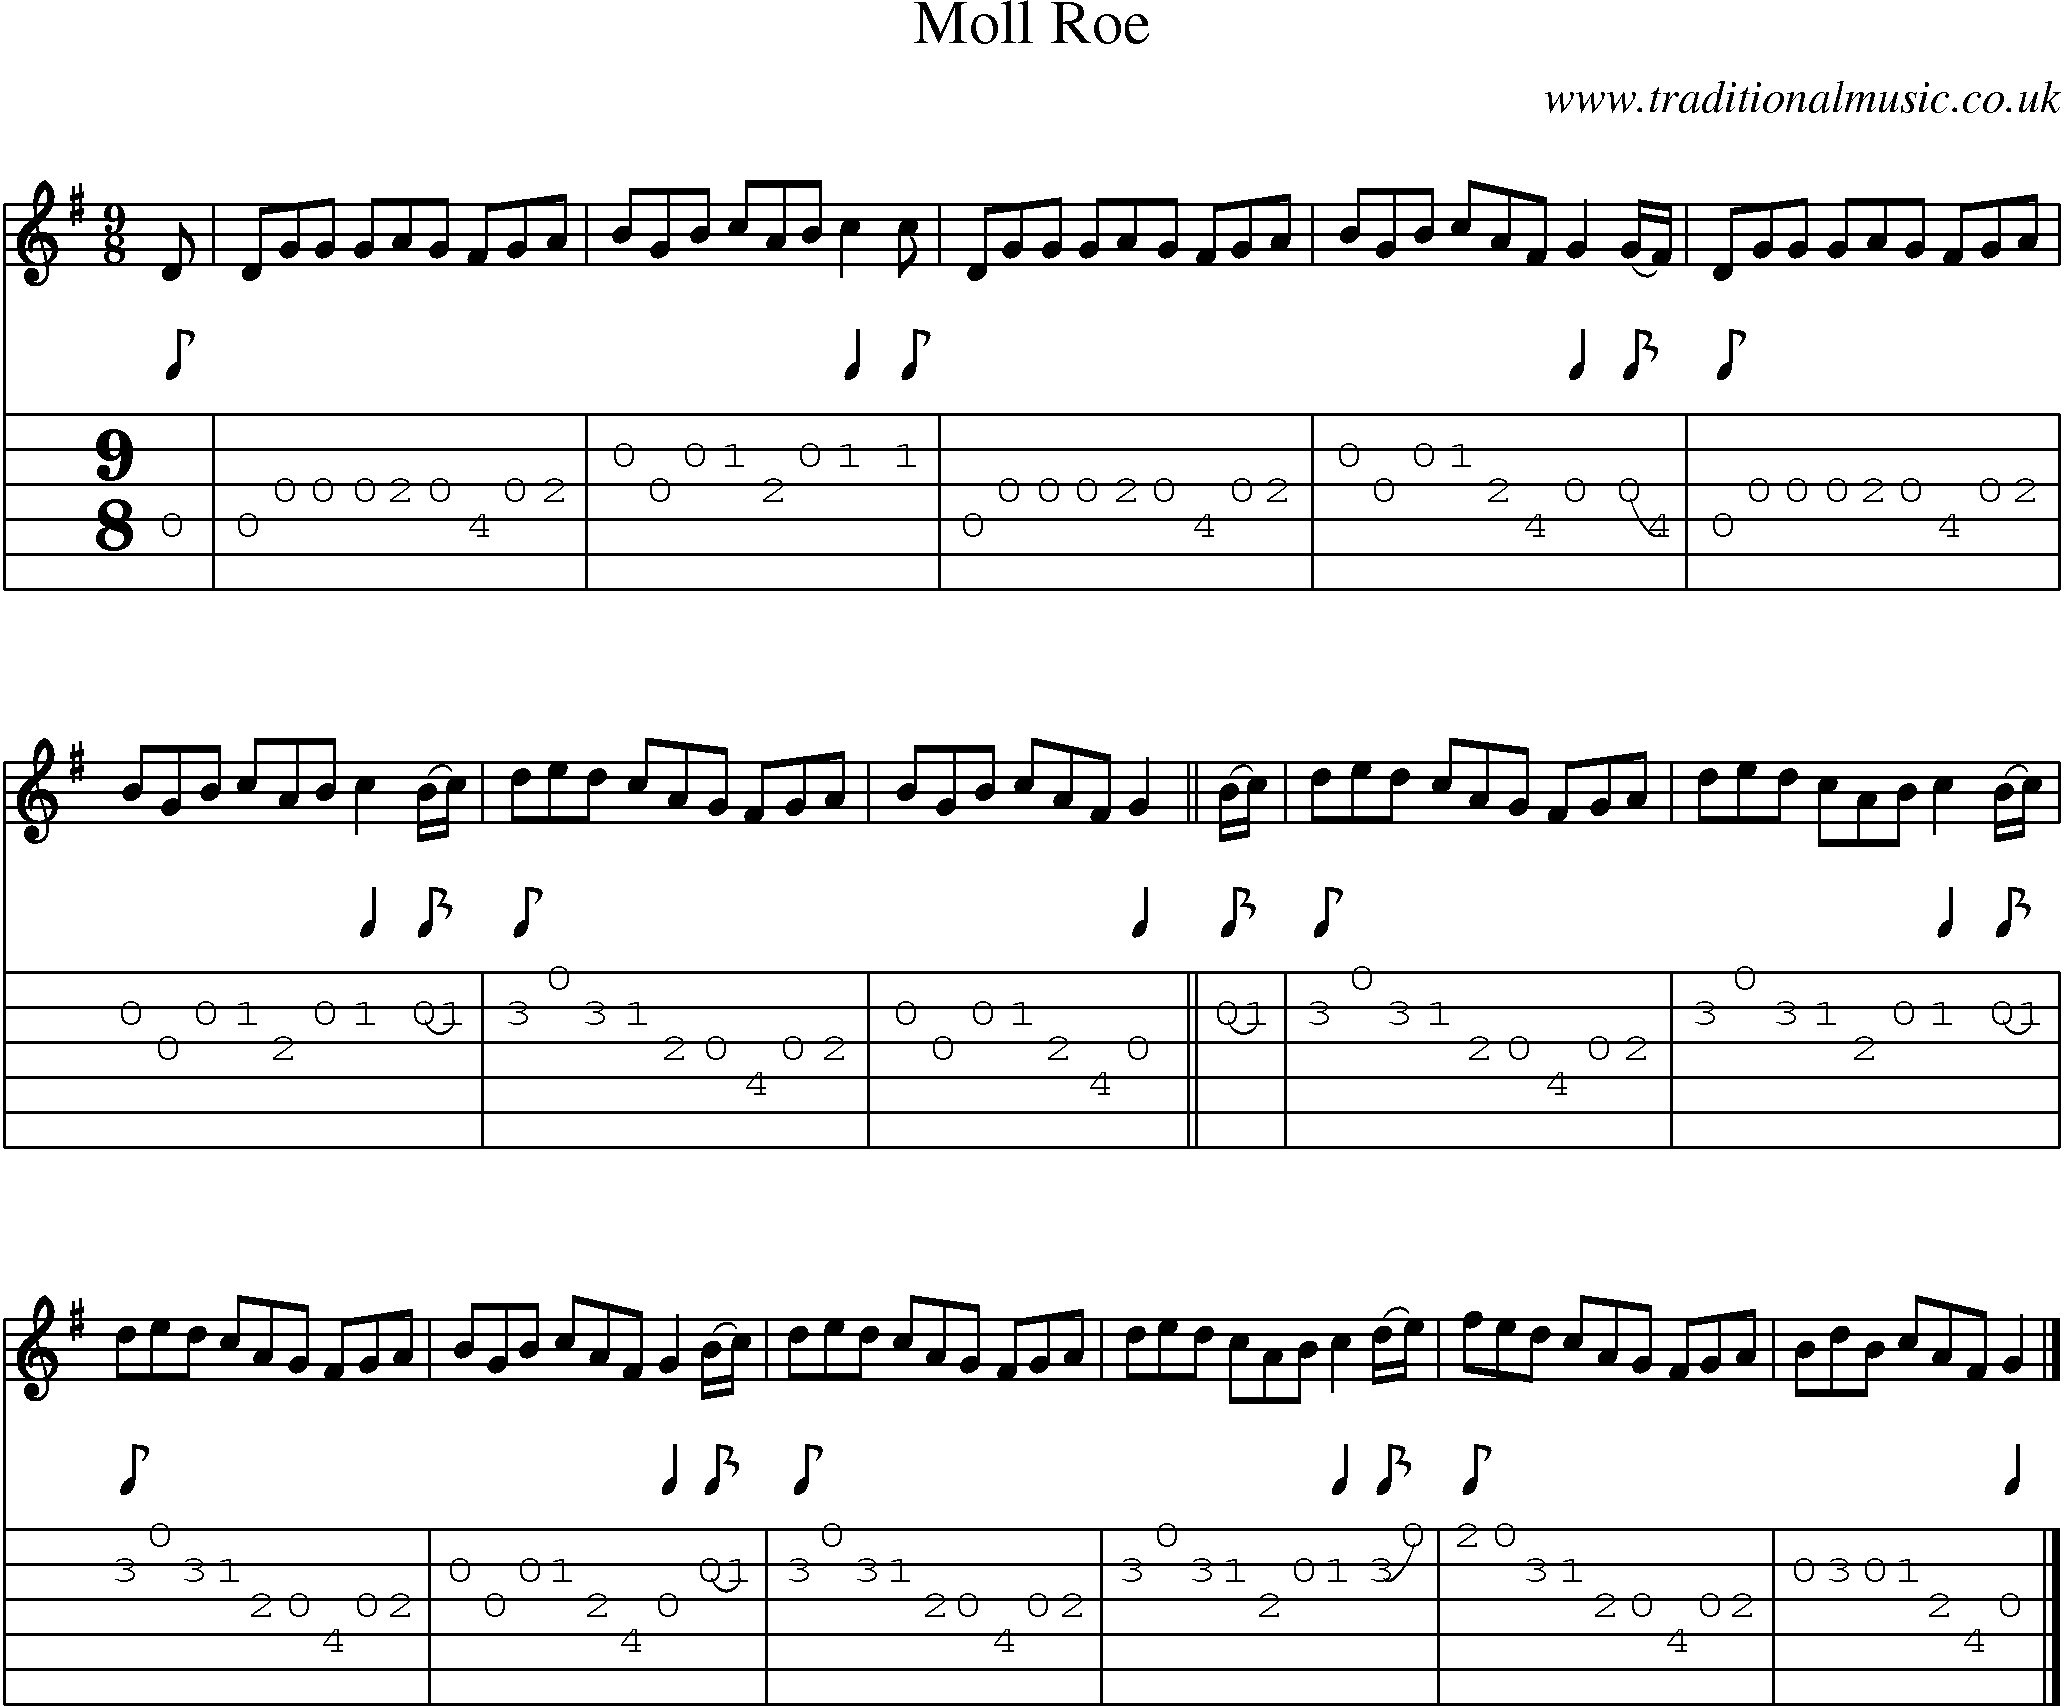 Music Score and Guitar Tabs for Moll Roe